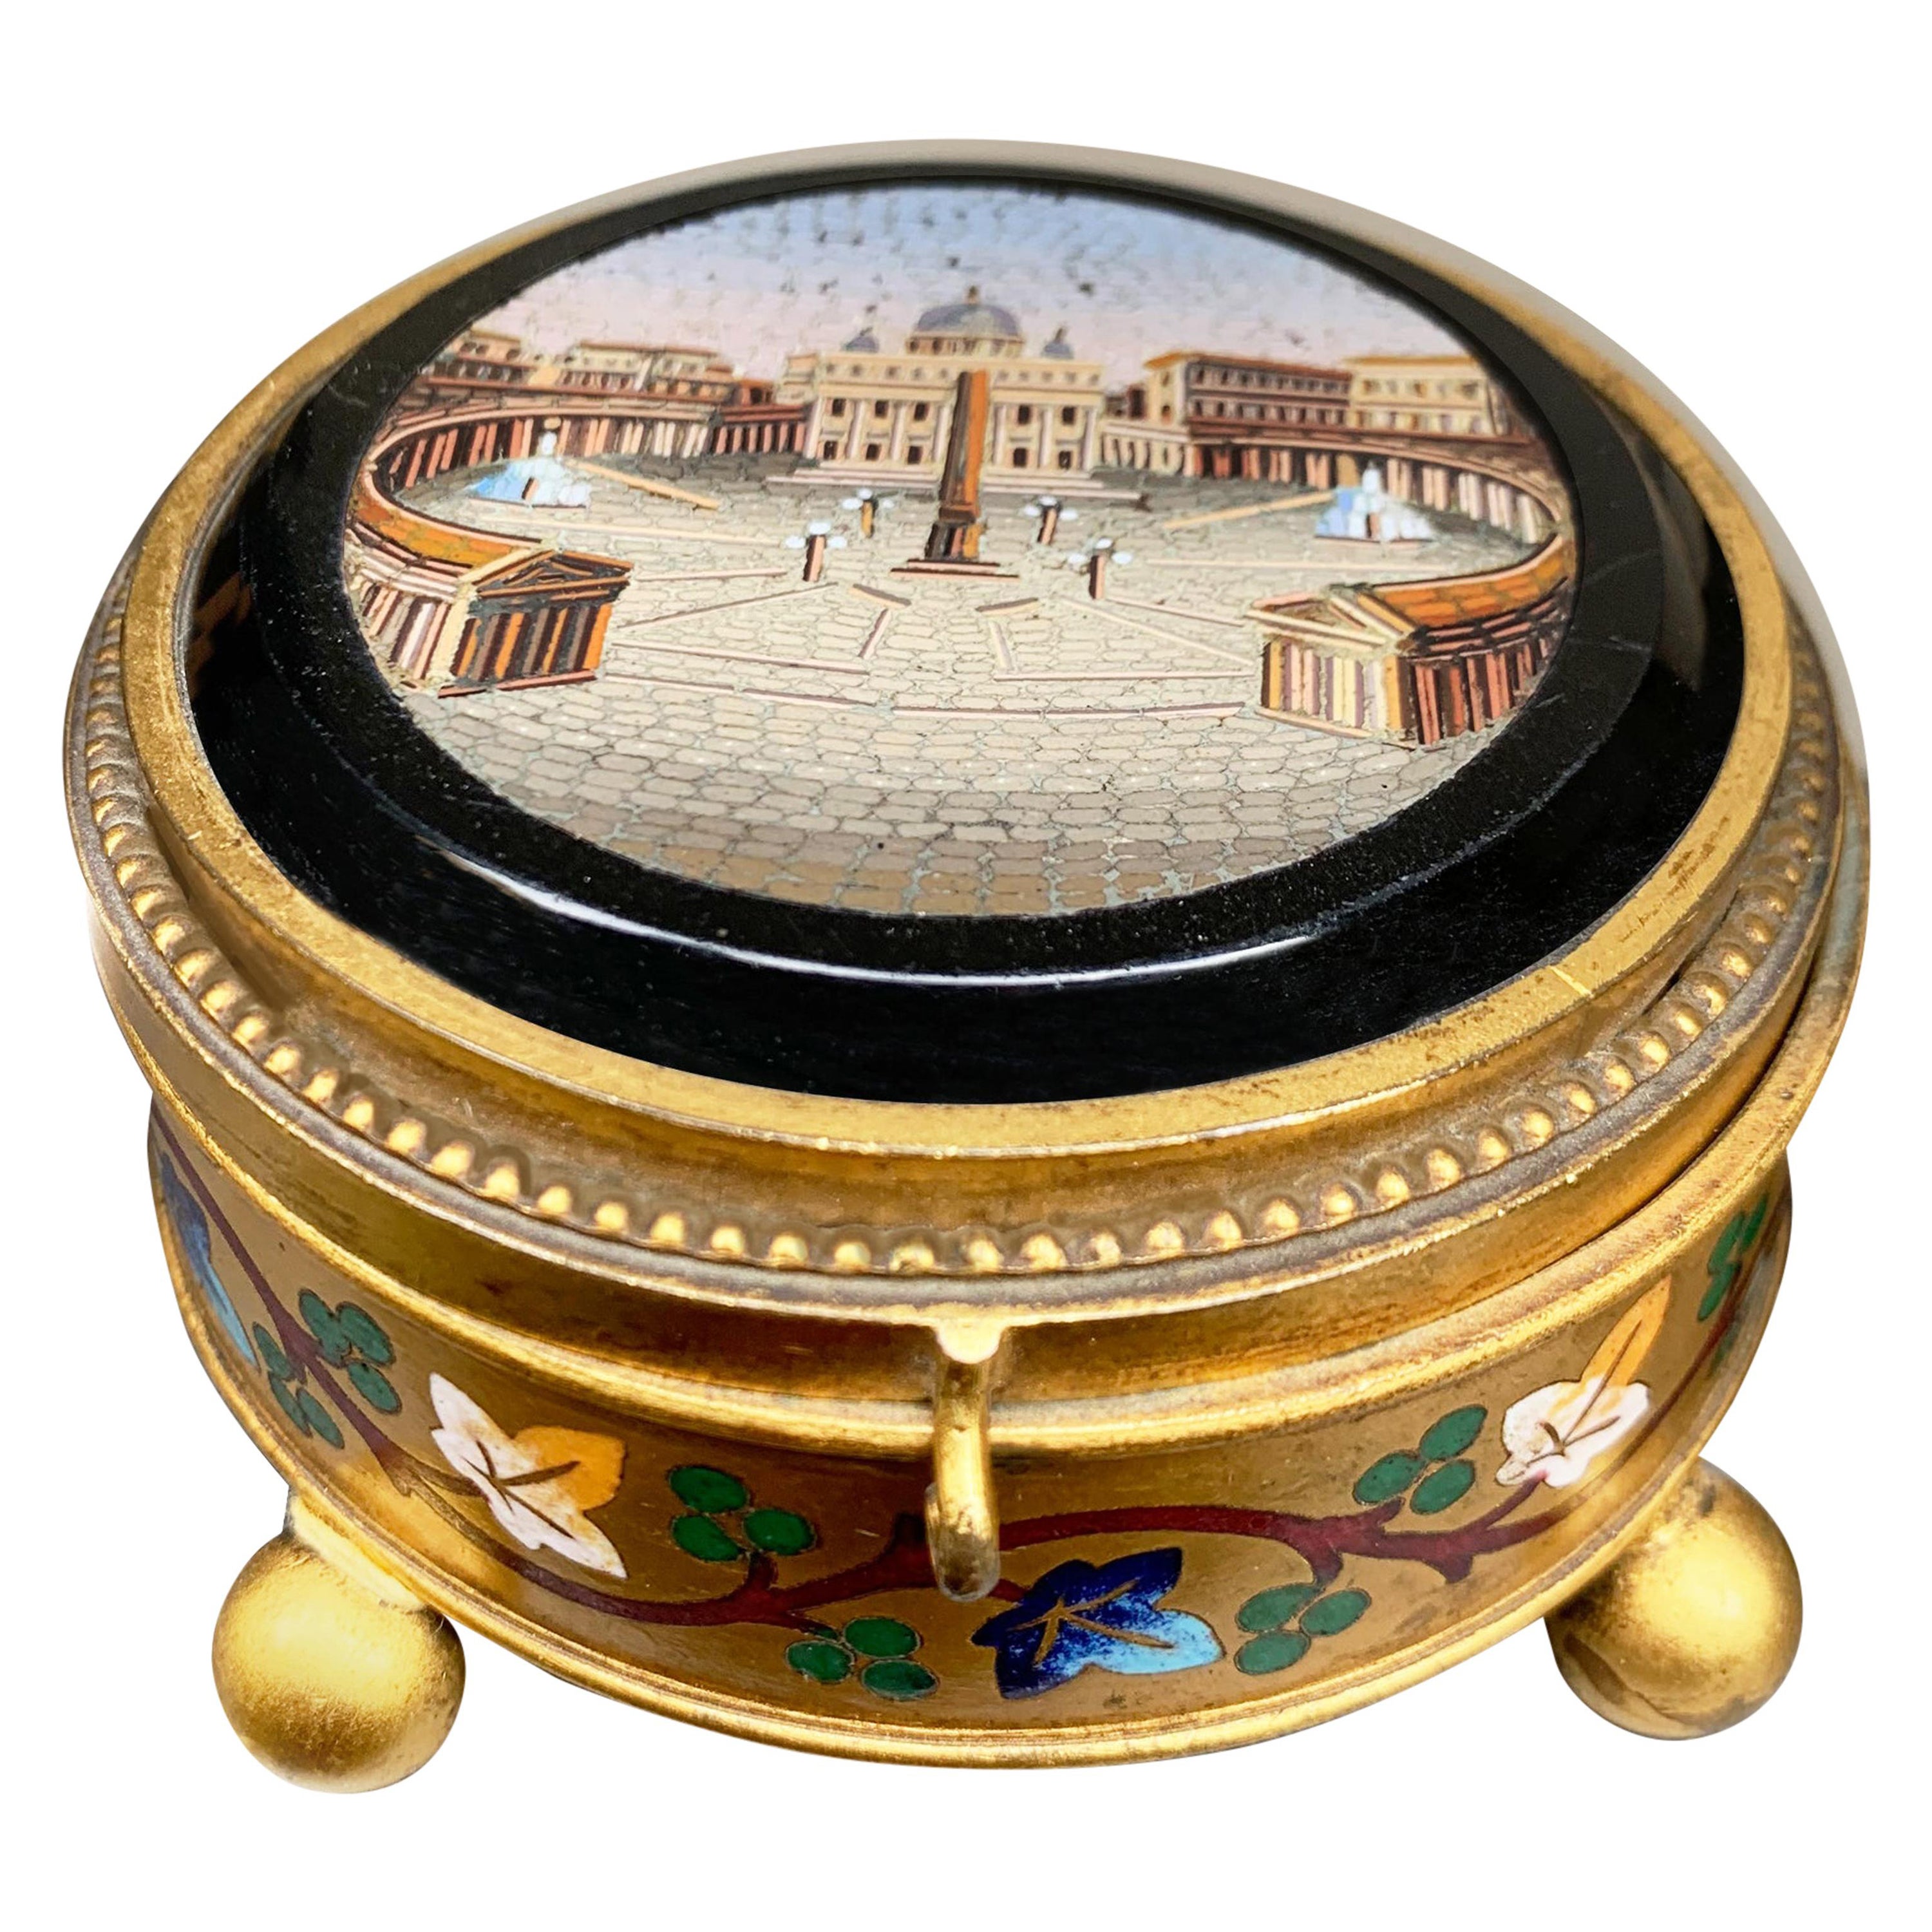 St. Peter's Basilica Micromosaic 'circa 1850' Set in a Gilded Bronze Box For Sale